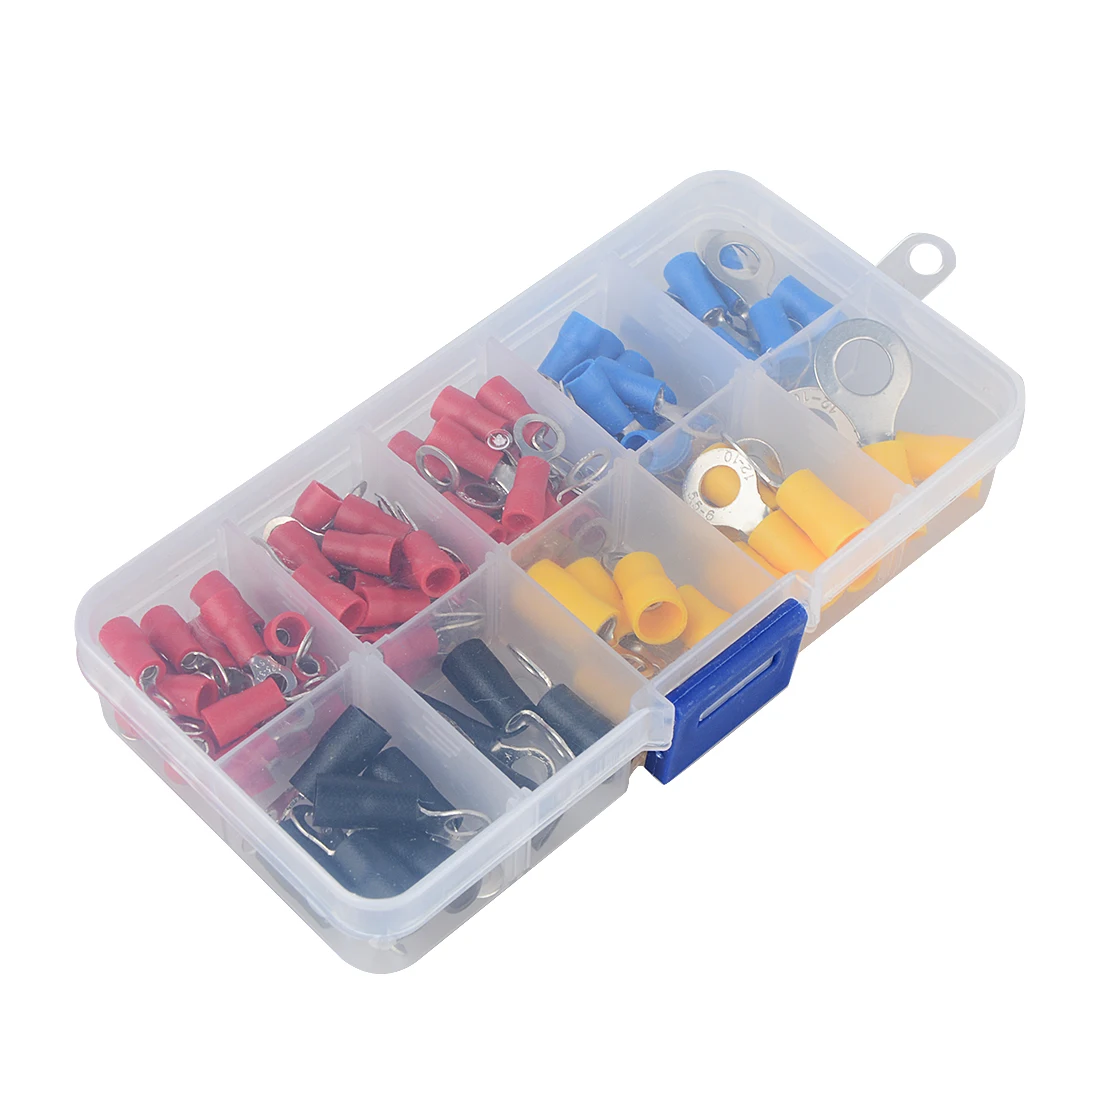 102Pcs Assorted Insulated Ring Crimp Terminals Electrical Wire Connector Box 